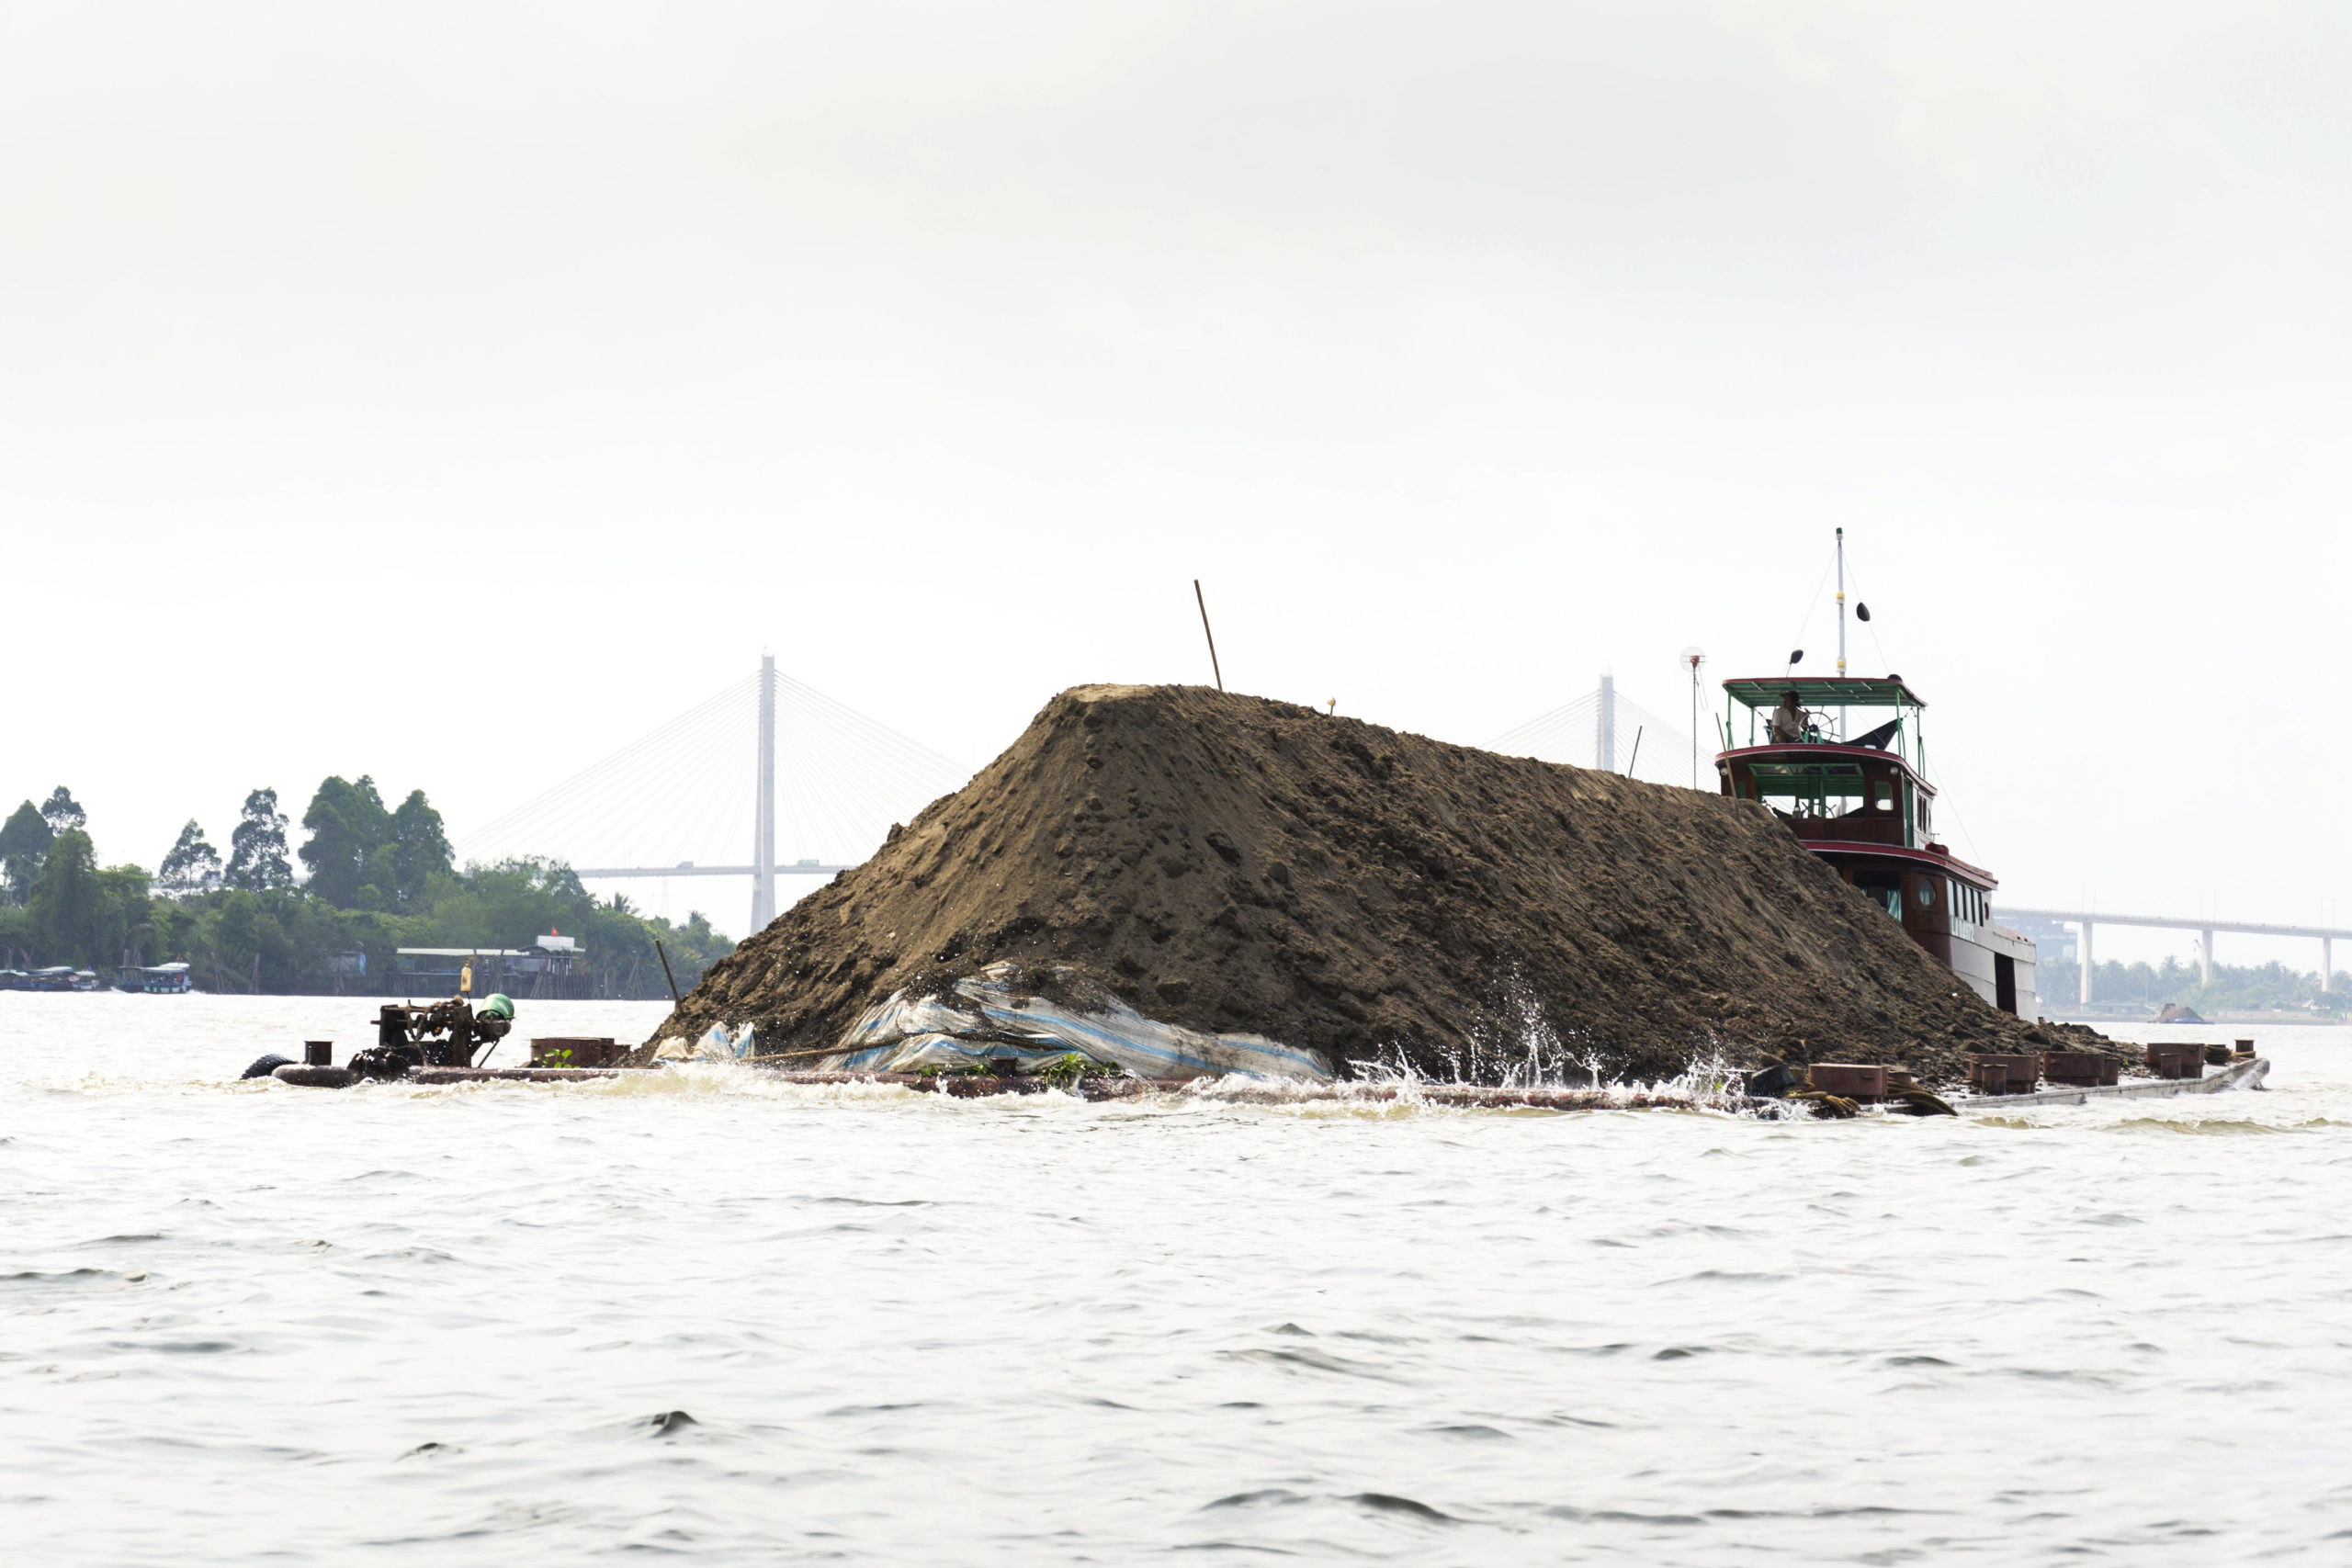 <p>Dredged sand is transported in the Mekong Delta, Vietnam. The Mekong Delta is sinking due to unsustainable sand mining and the impacts of upstream dams. (Image: Josef Kubes / Alamy)</p>